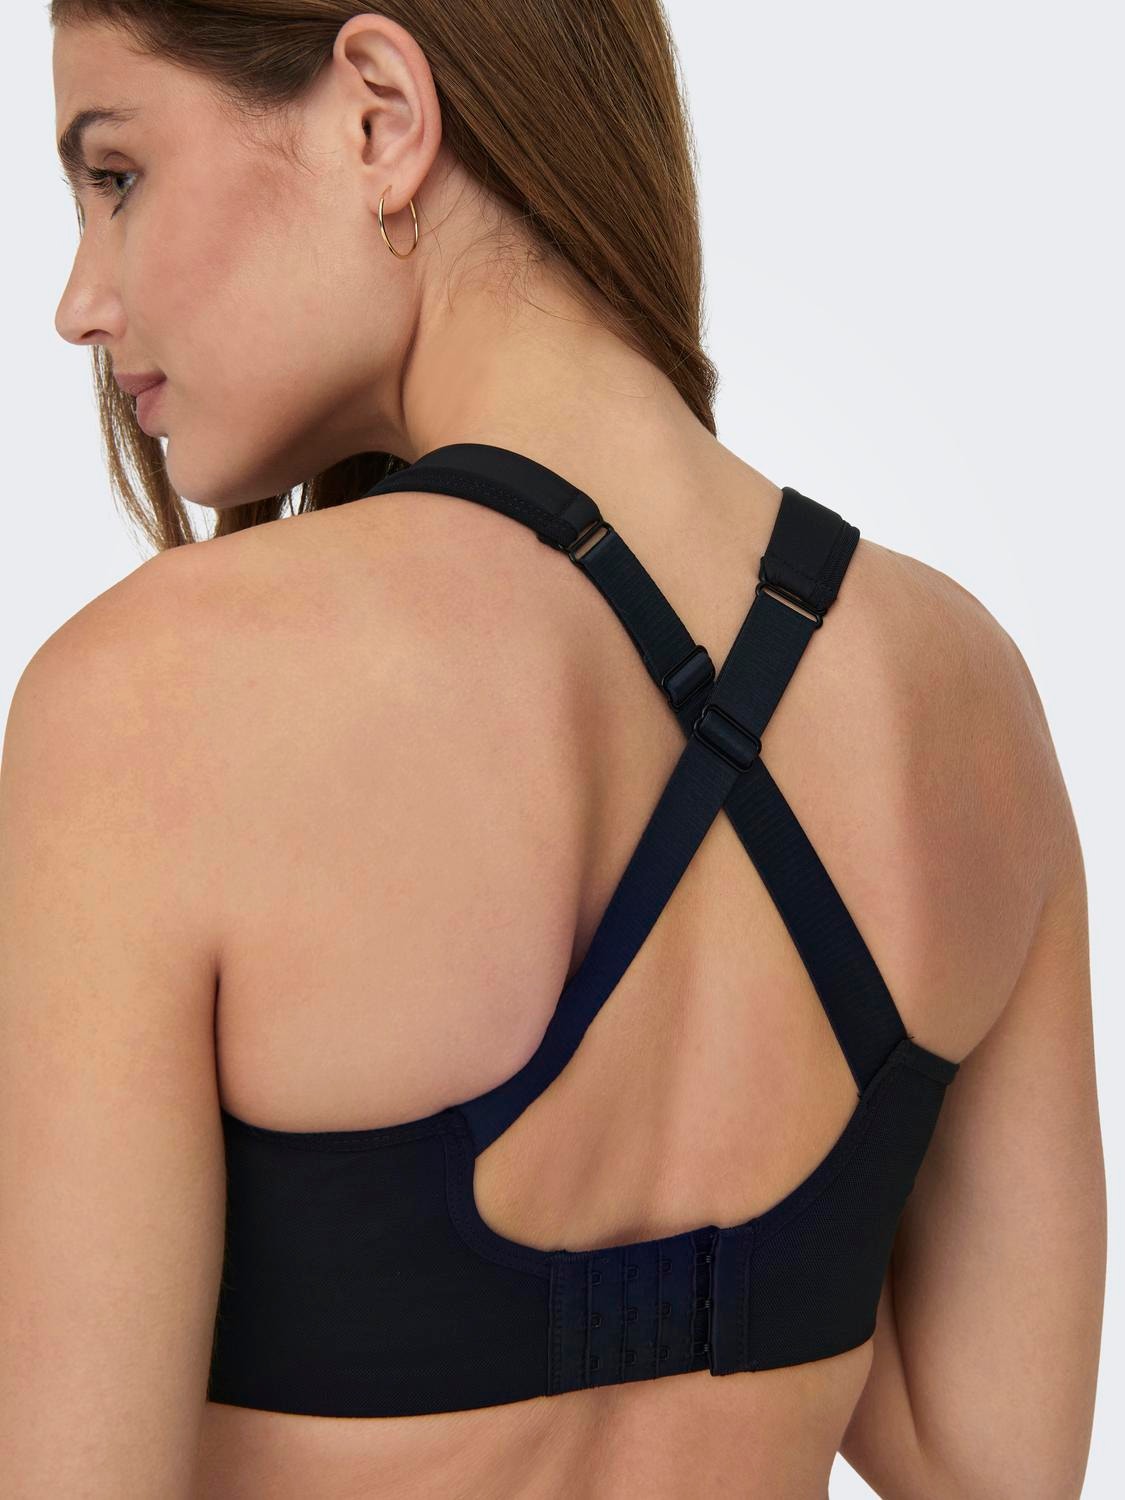 Bras with adjustable straps